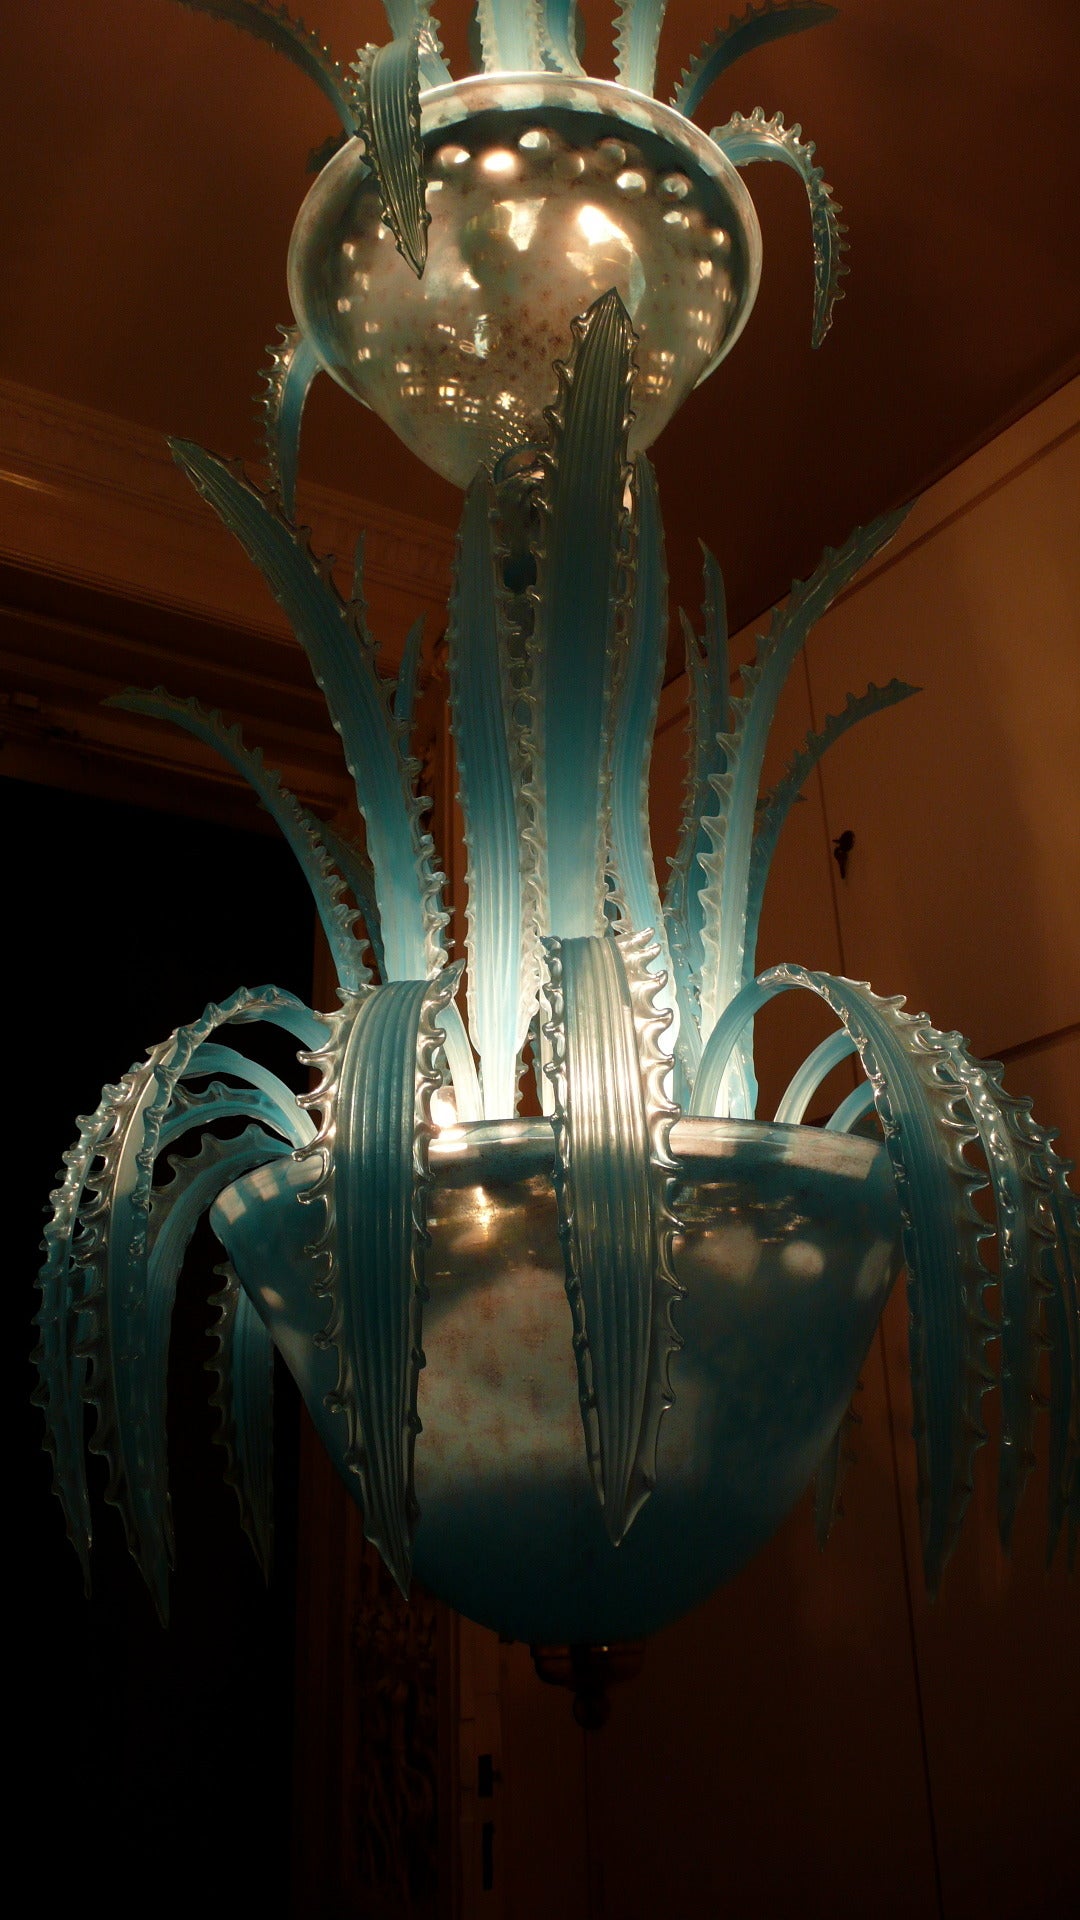 Imposing waterfall handblown glass chandelier by Murano. Coming from the old hotel furnishings Fuenti (Amalfi Coast).

Measures: Height 155 cm,
width 56 cm,
48 leaves.
Two cups.
Six lights.